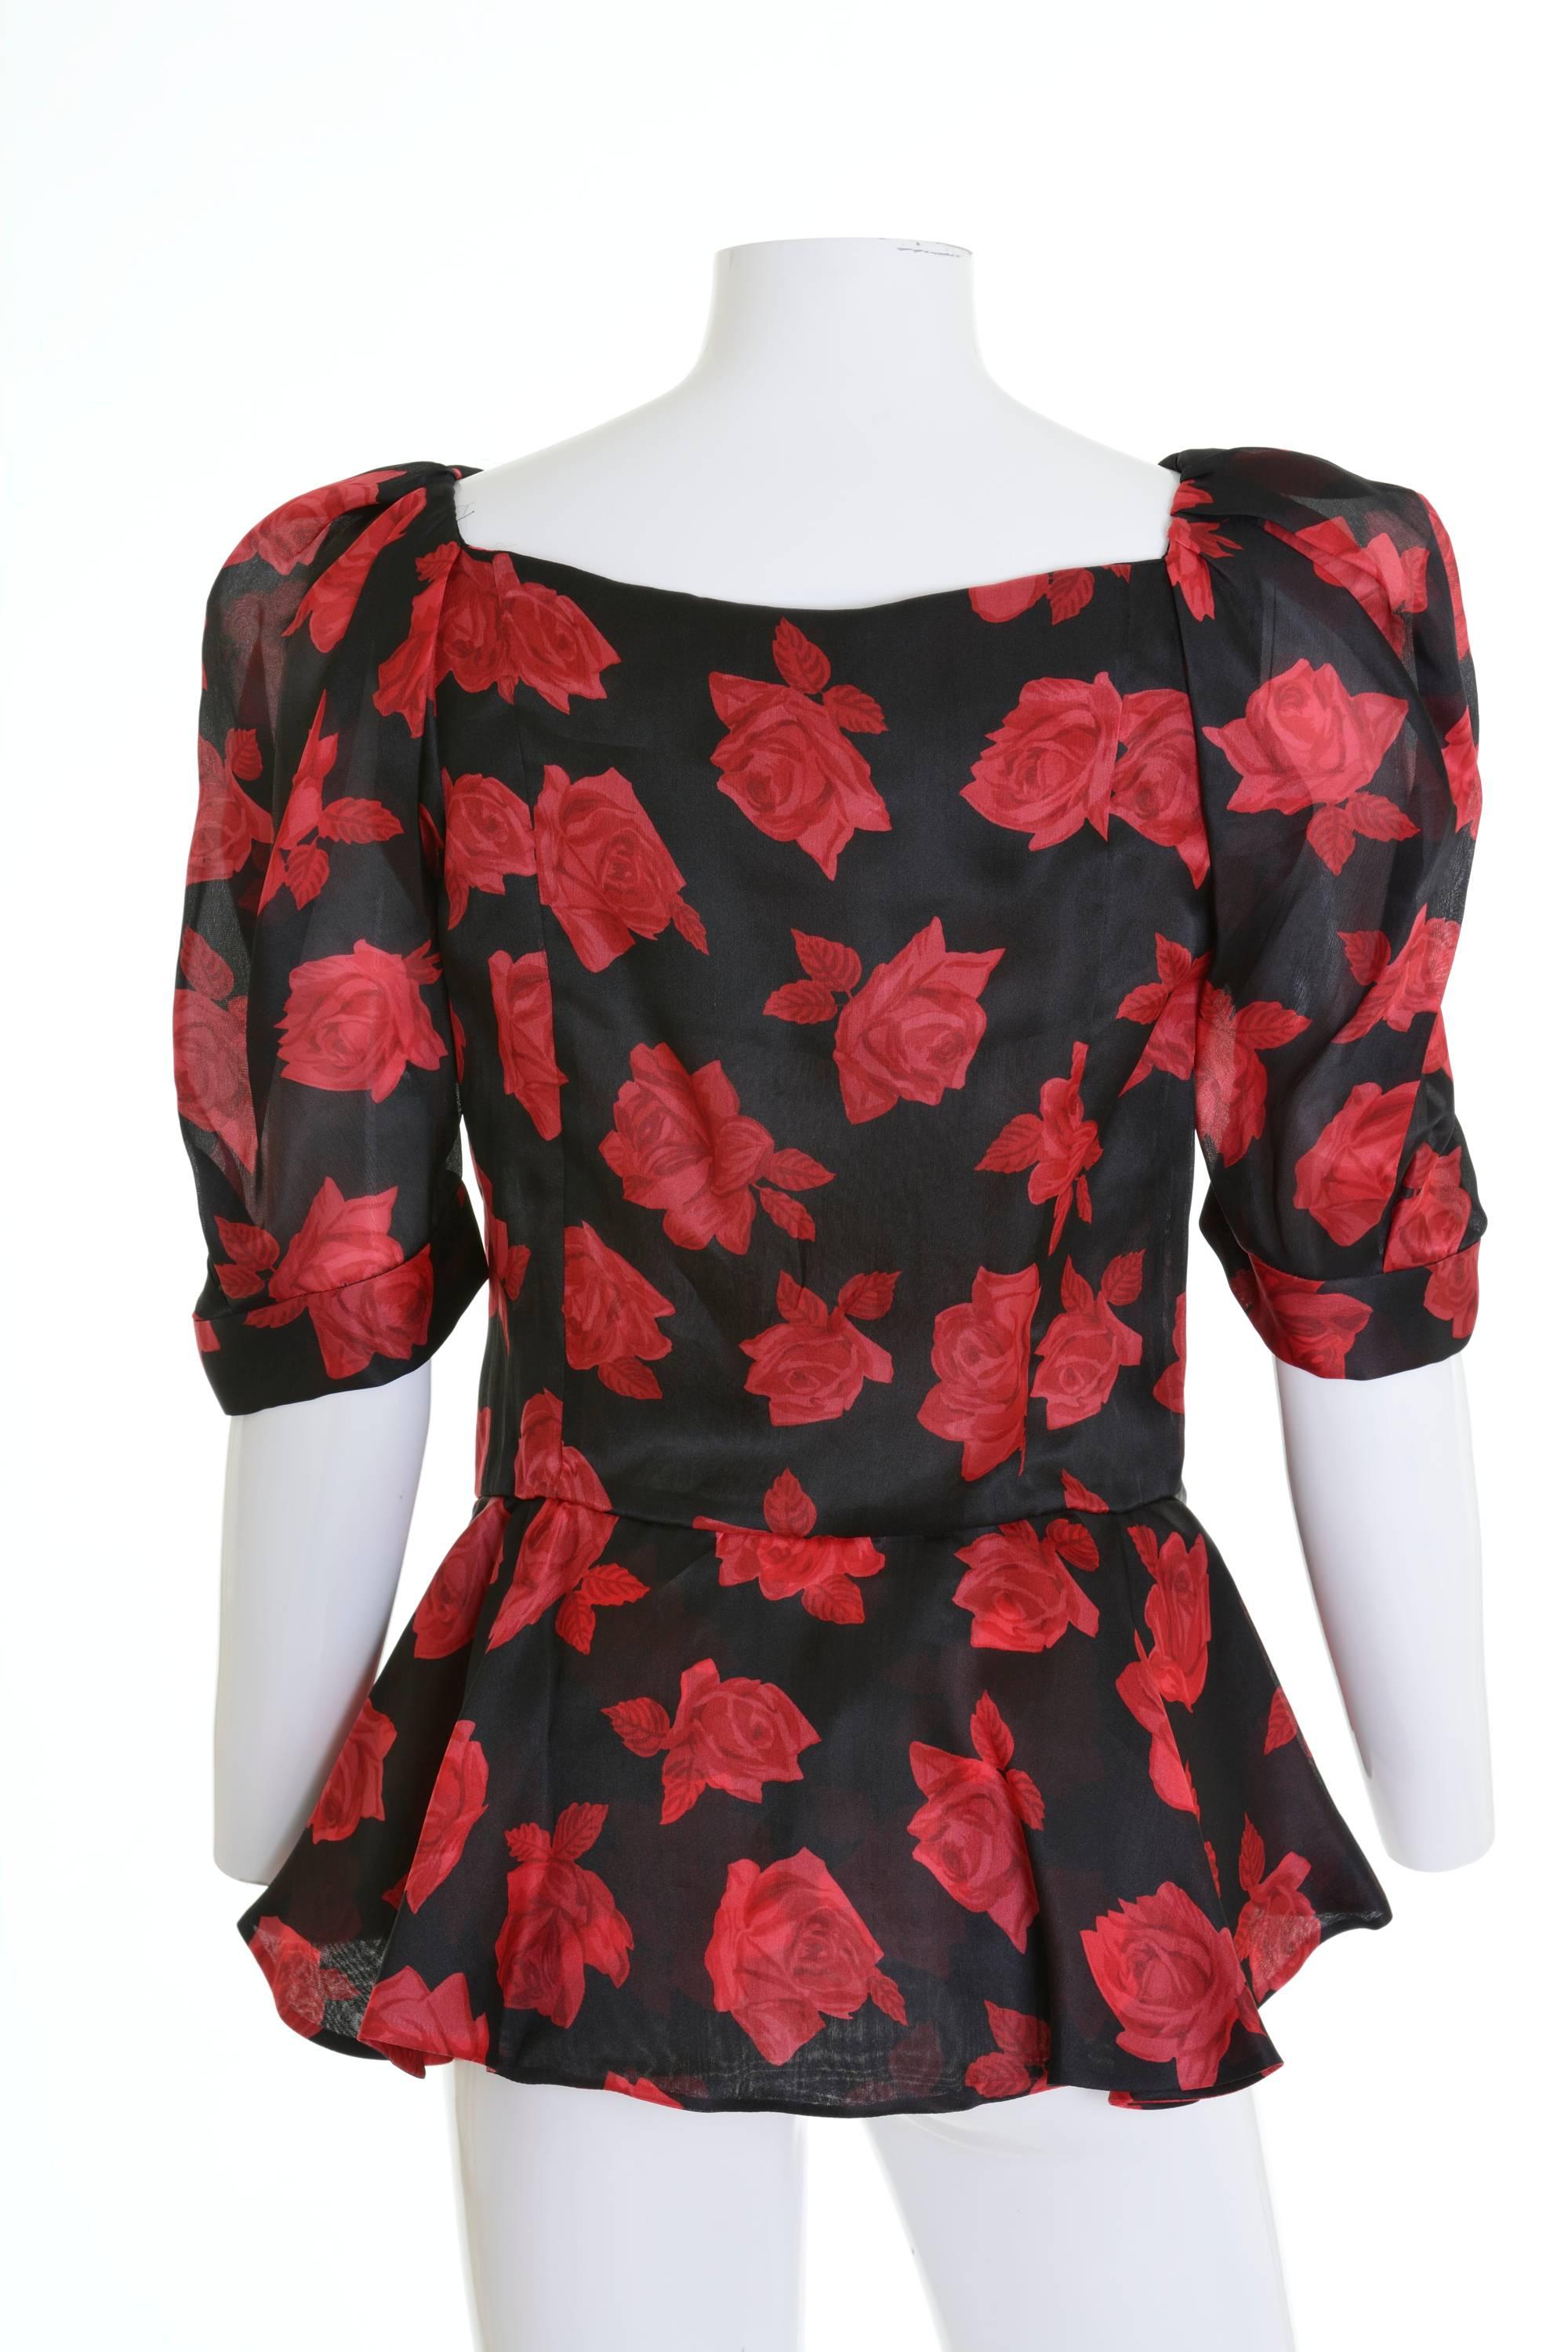 This gorgeous and iconic Yves Saint Laurent 1980s blouse shirt is in a black and red roses print silk fabric. It has boning bodice, peplum line, puffed sleeves and stones buttons closure.

Excellent vintage condition

Label: Yves Saint Laurent Rive